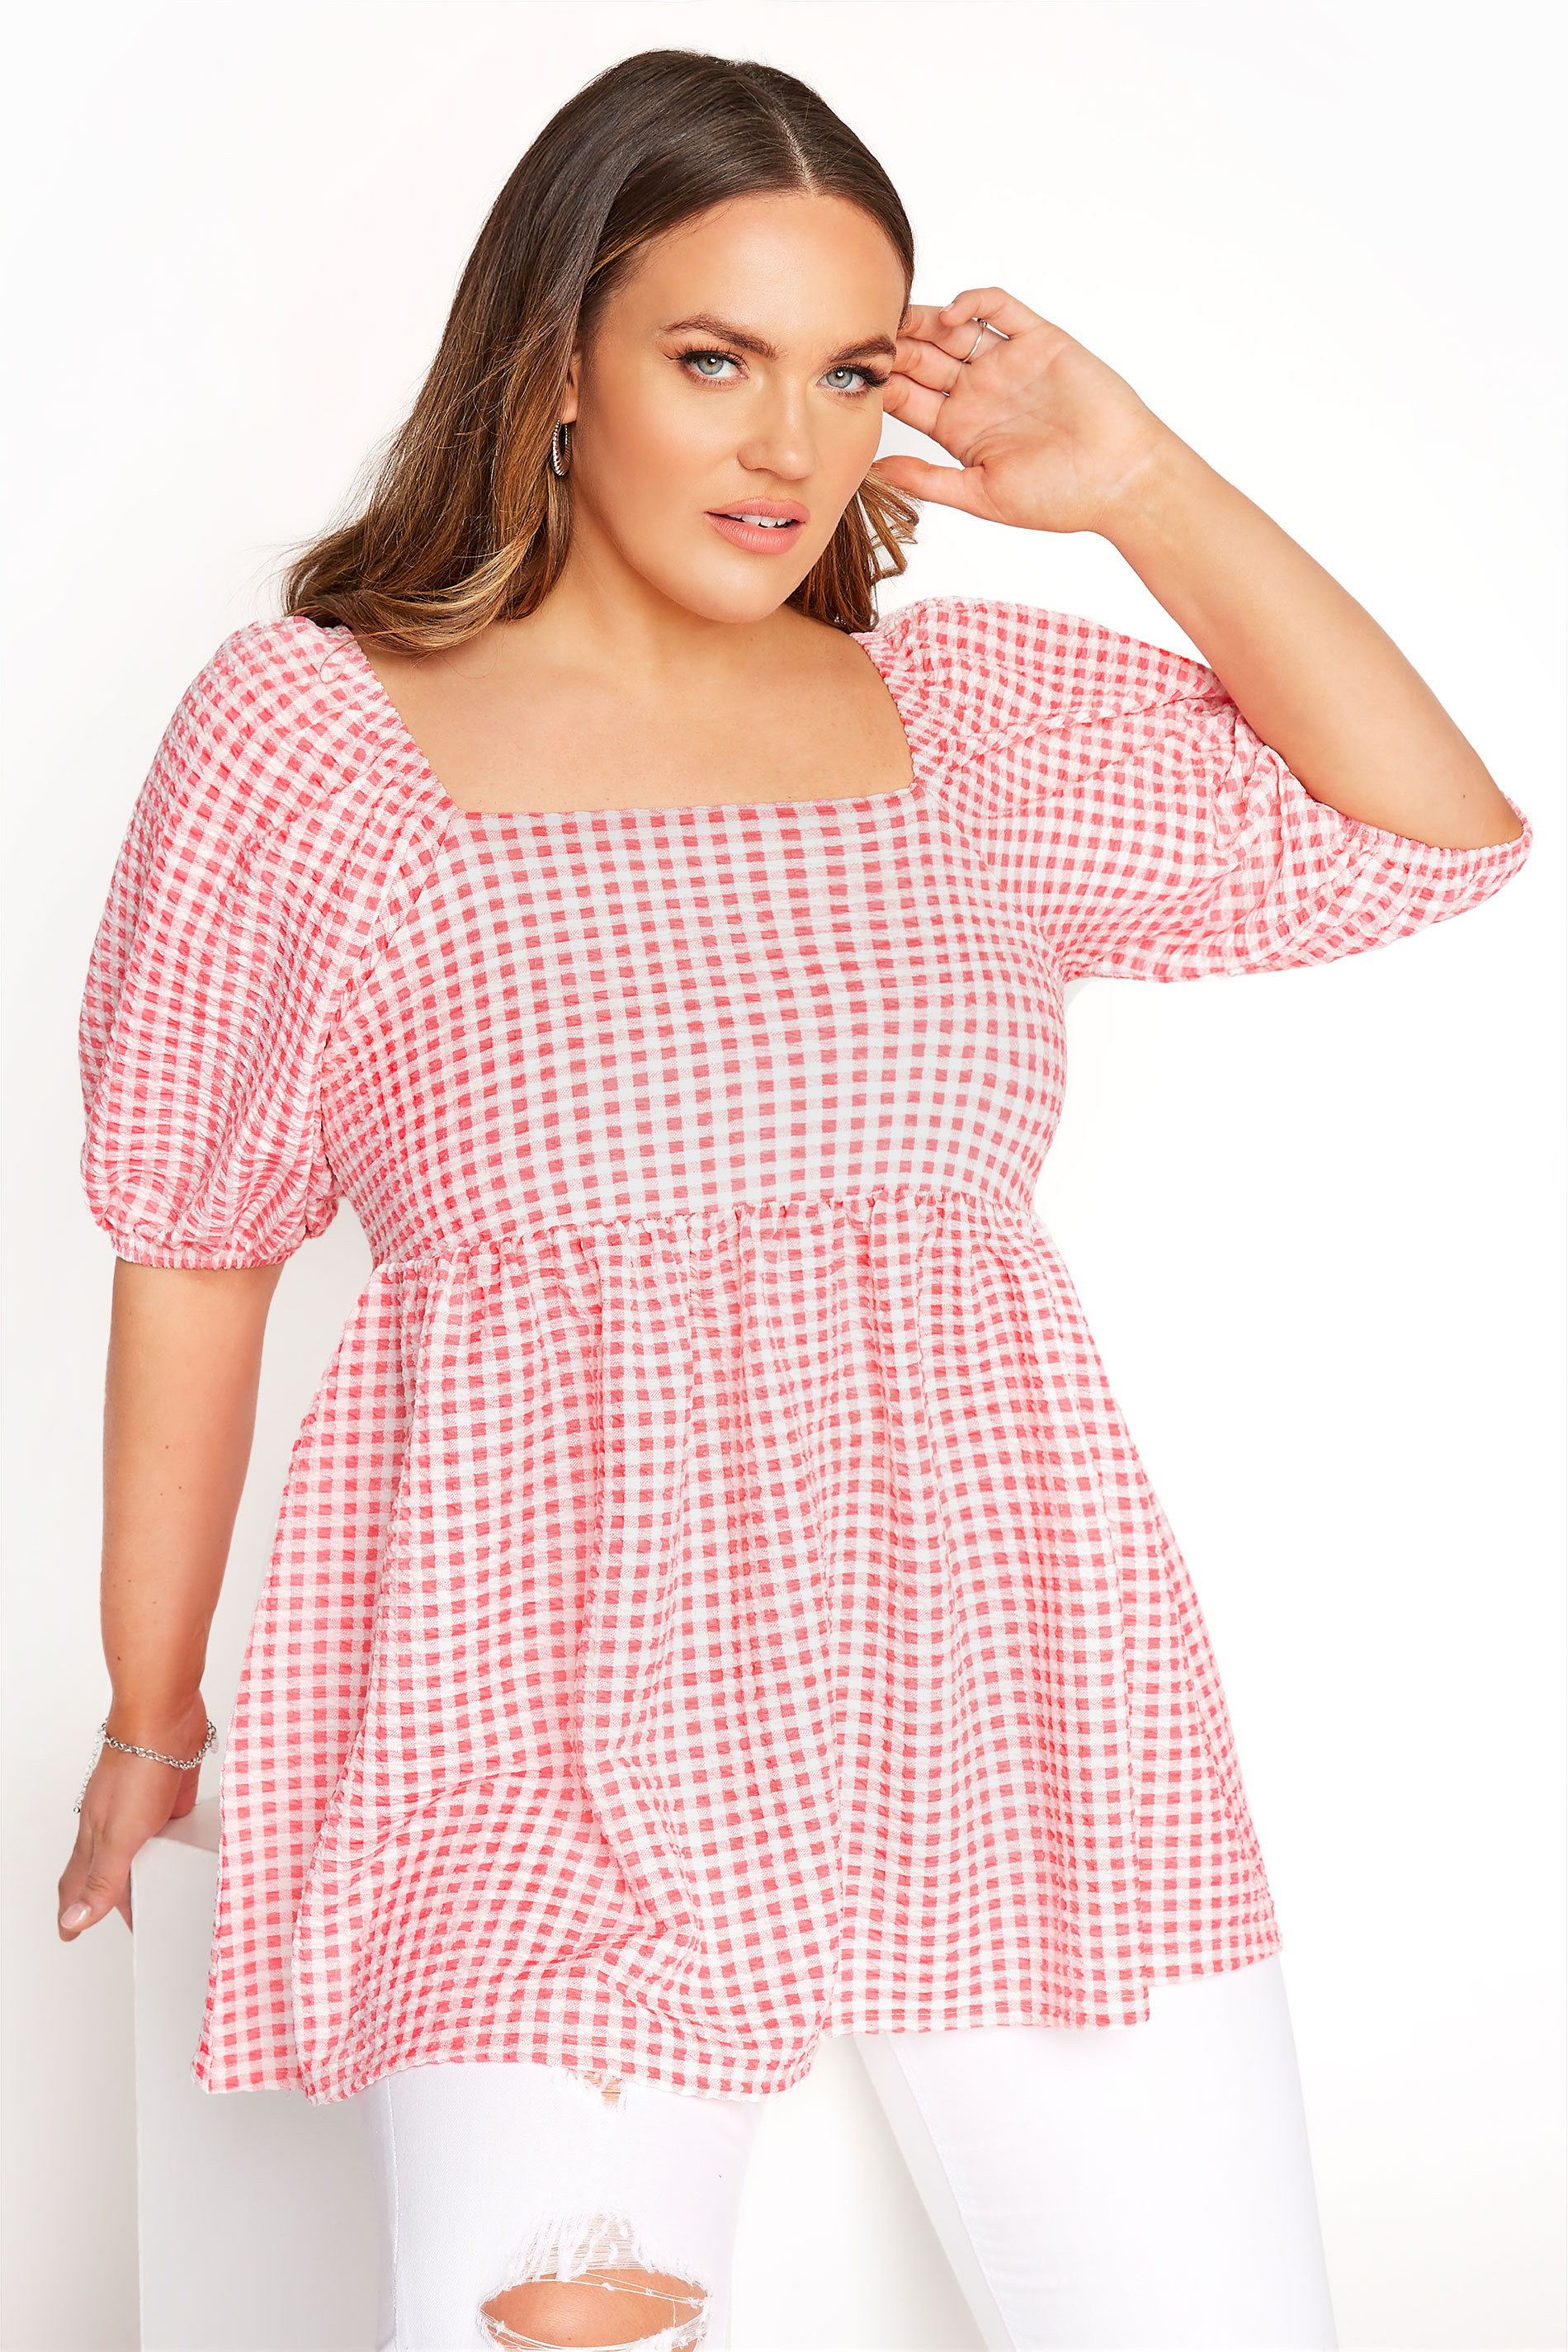 Grande taille  Tops Grande taille  Tops Casual | LIMITED COLLECTION - Top Corail à Carreaux Manches Bouffantes - OE99983